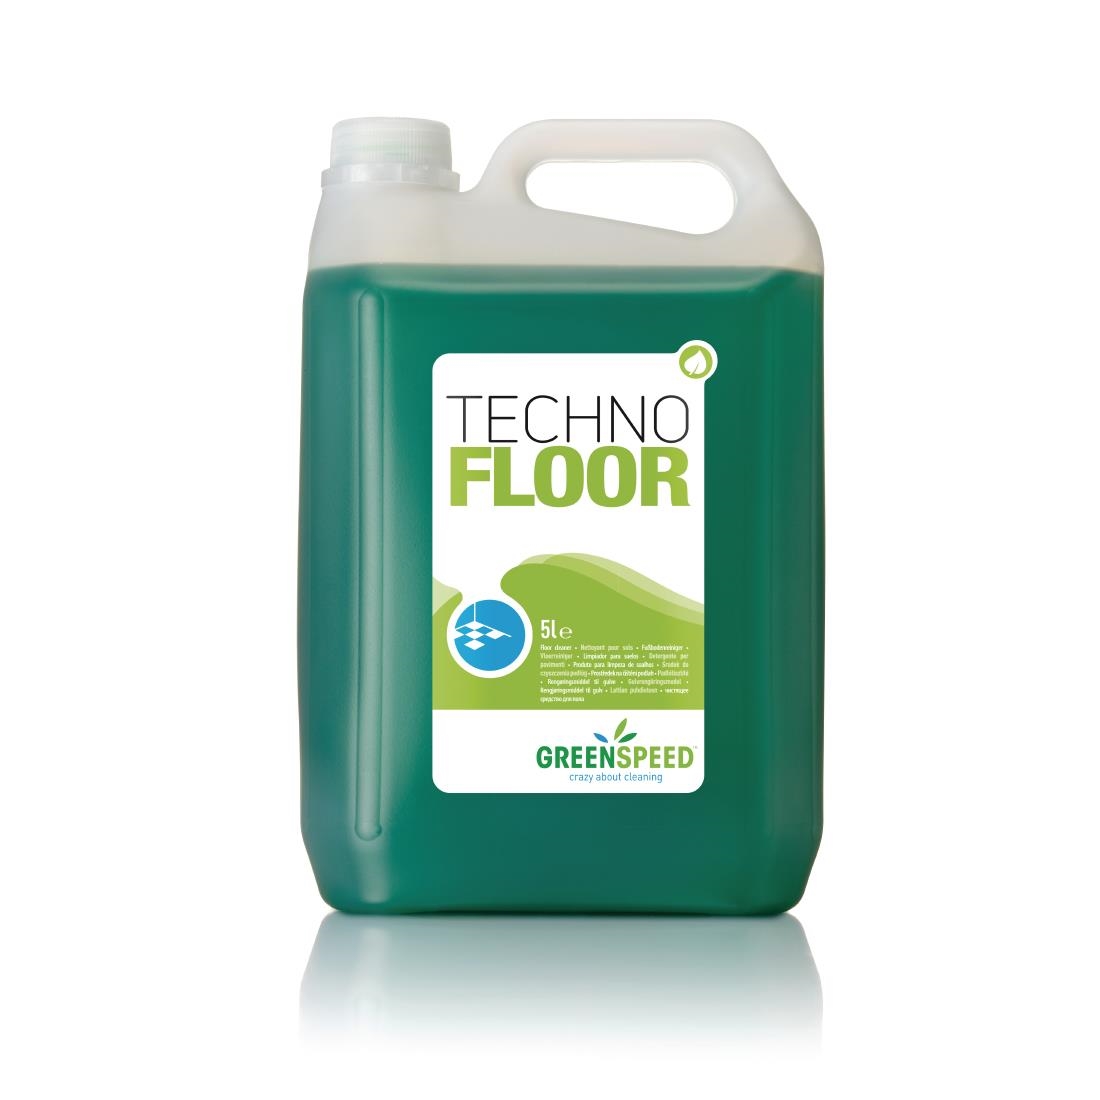 Greenspeed Techno Floor Cleaner Concentrate 5Ltr (4 Pack)